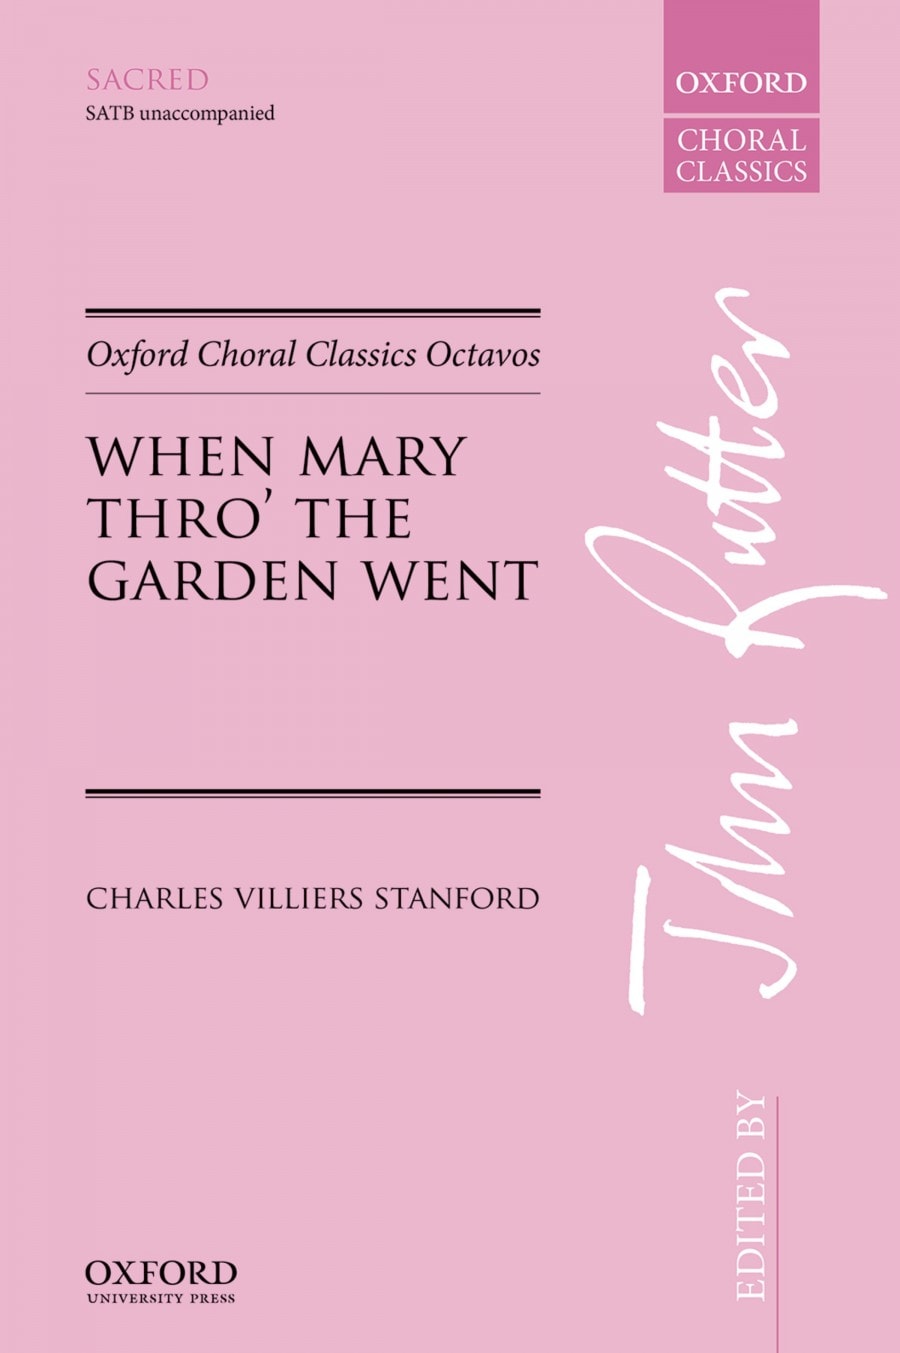 Stanford: When Mary thro' the garden went SATB published by OUP